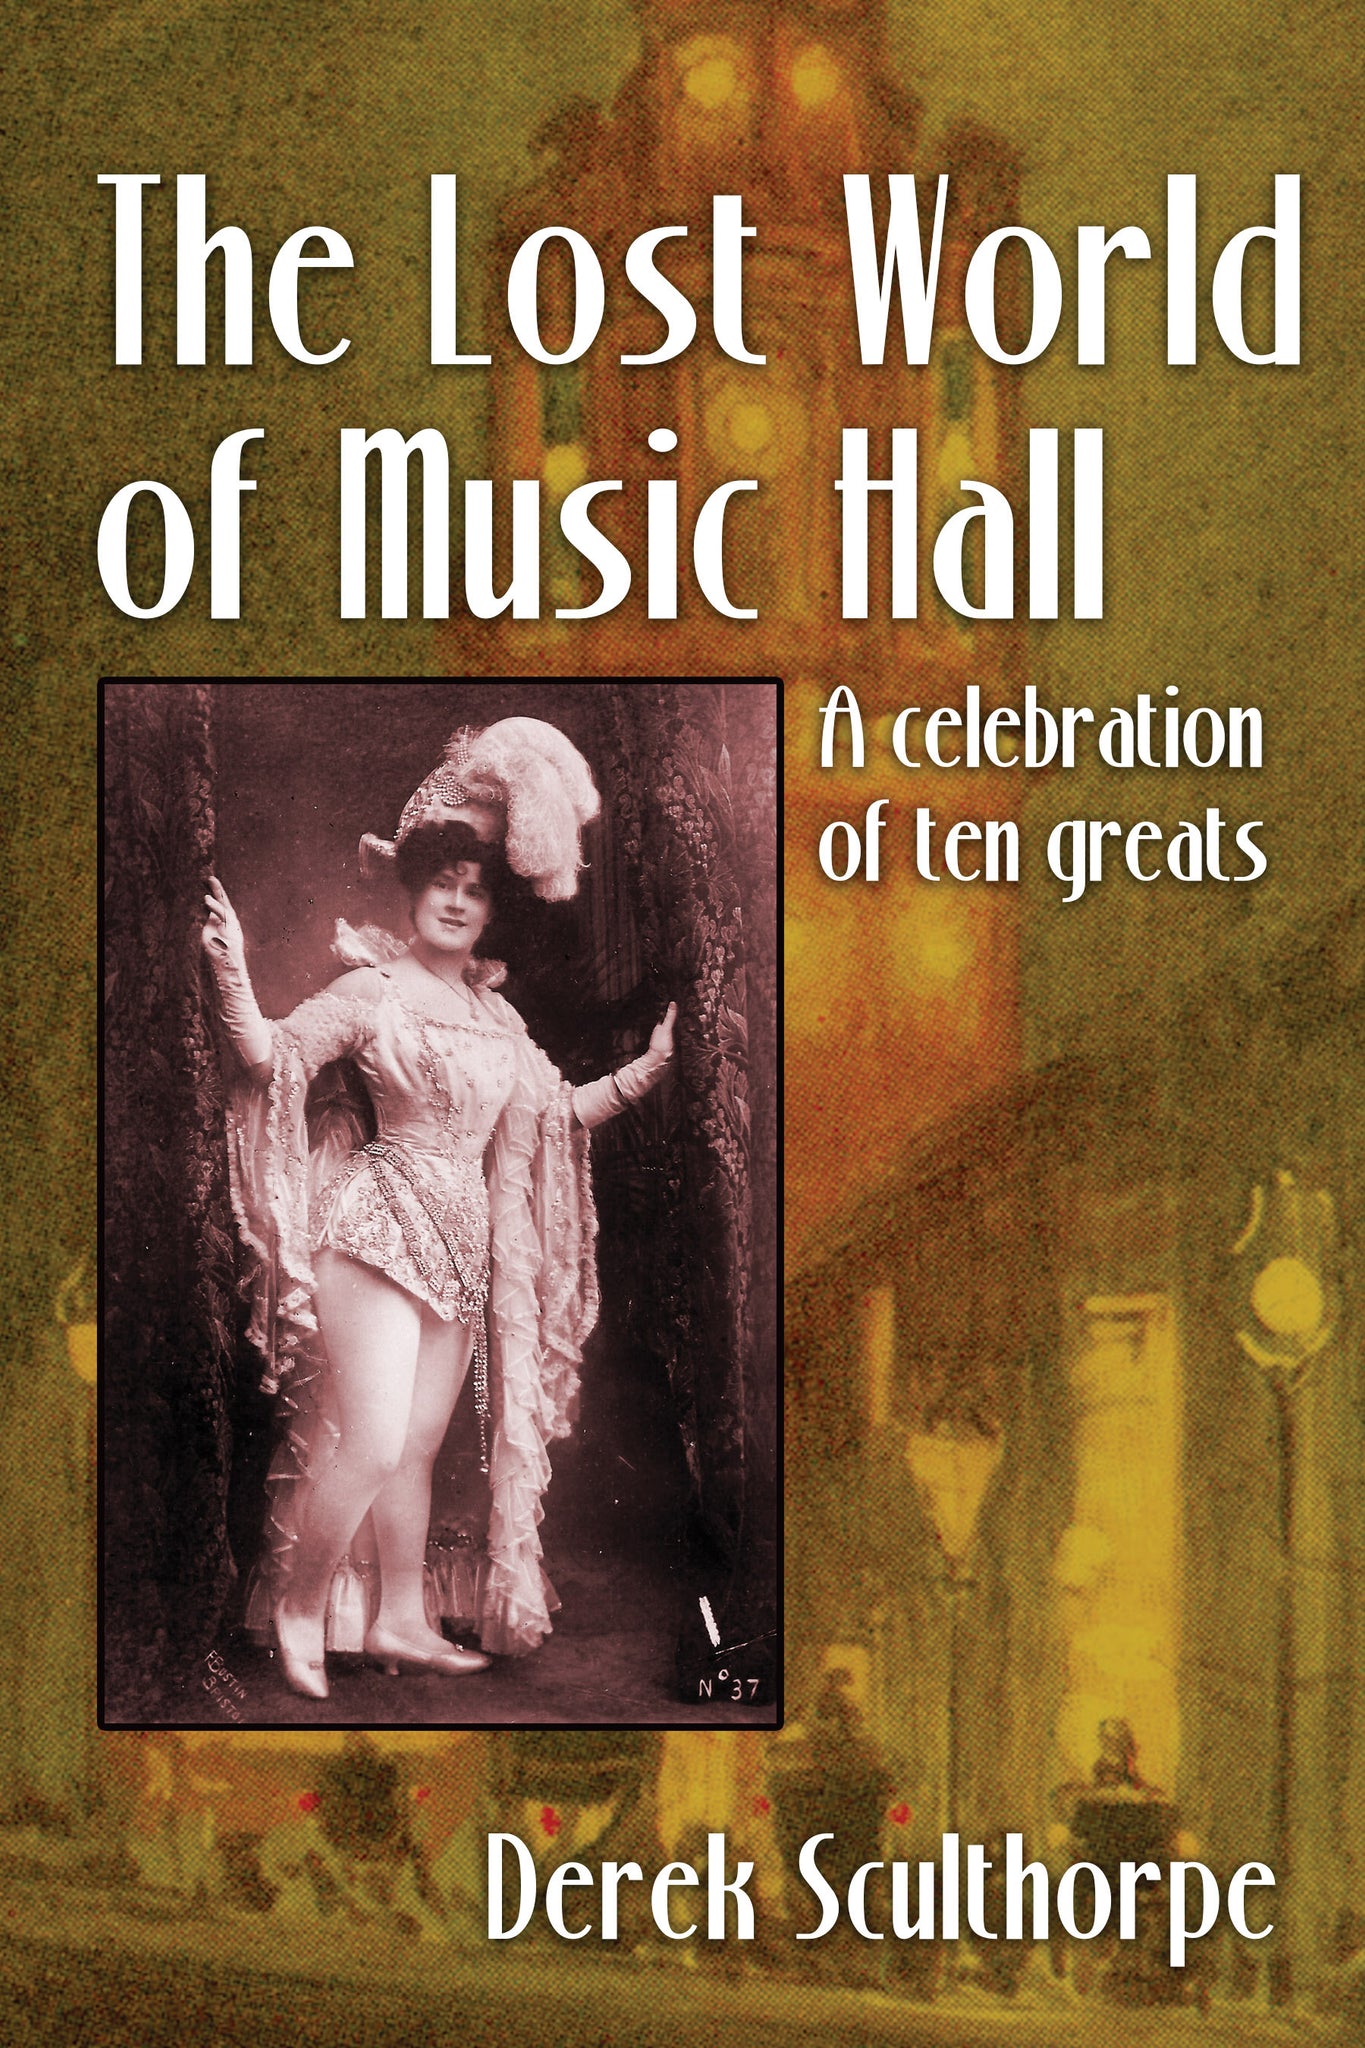 The Lost World of Music Hall (paperback)